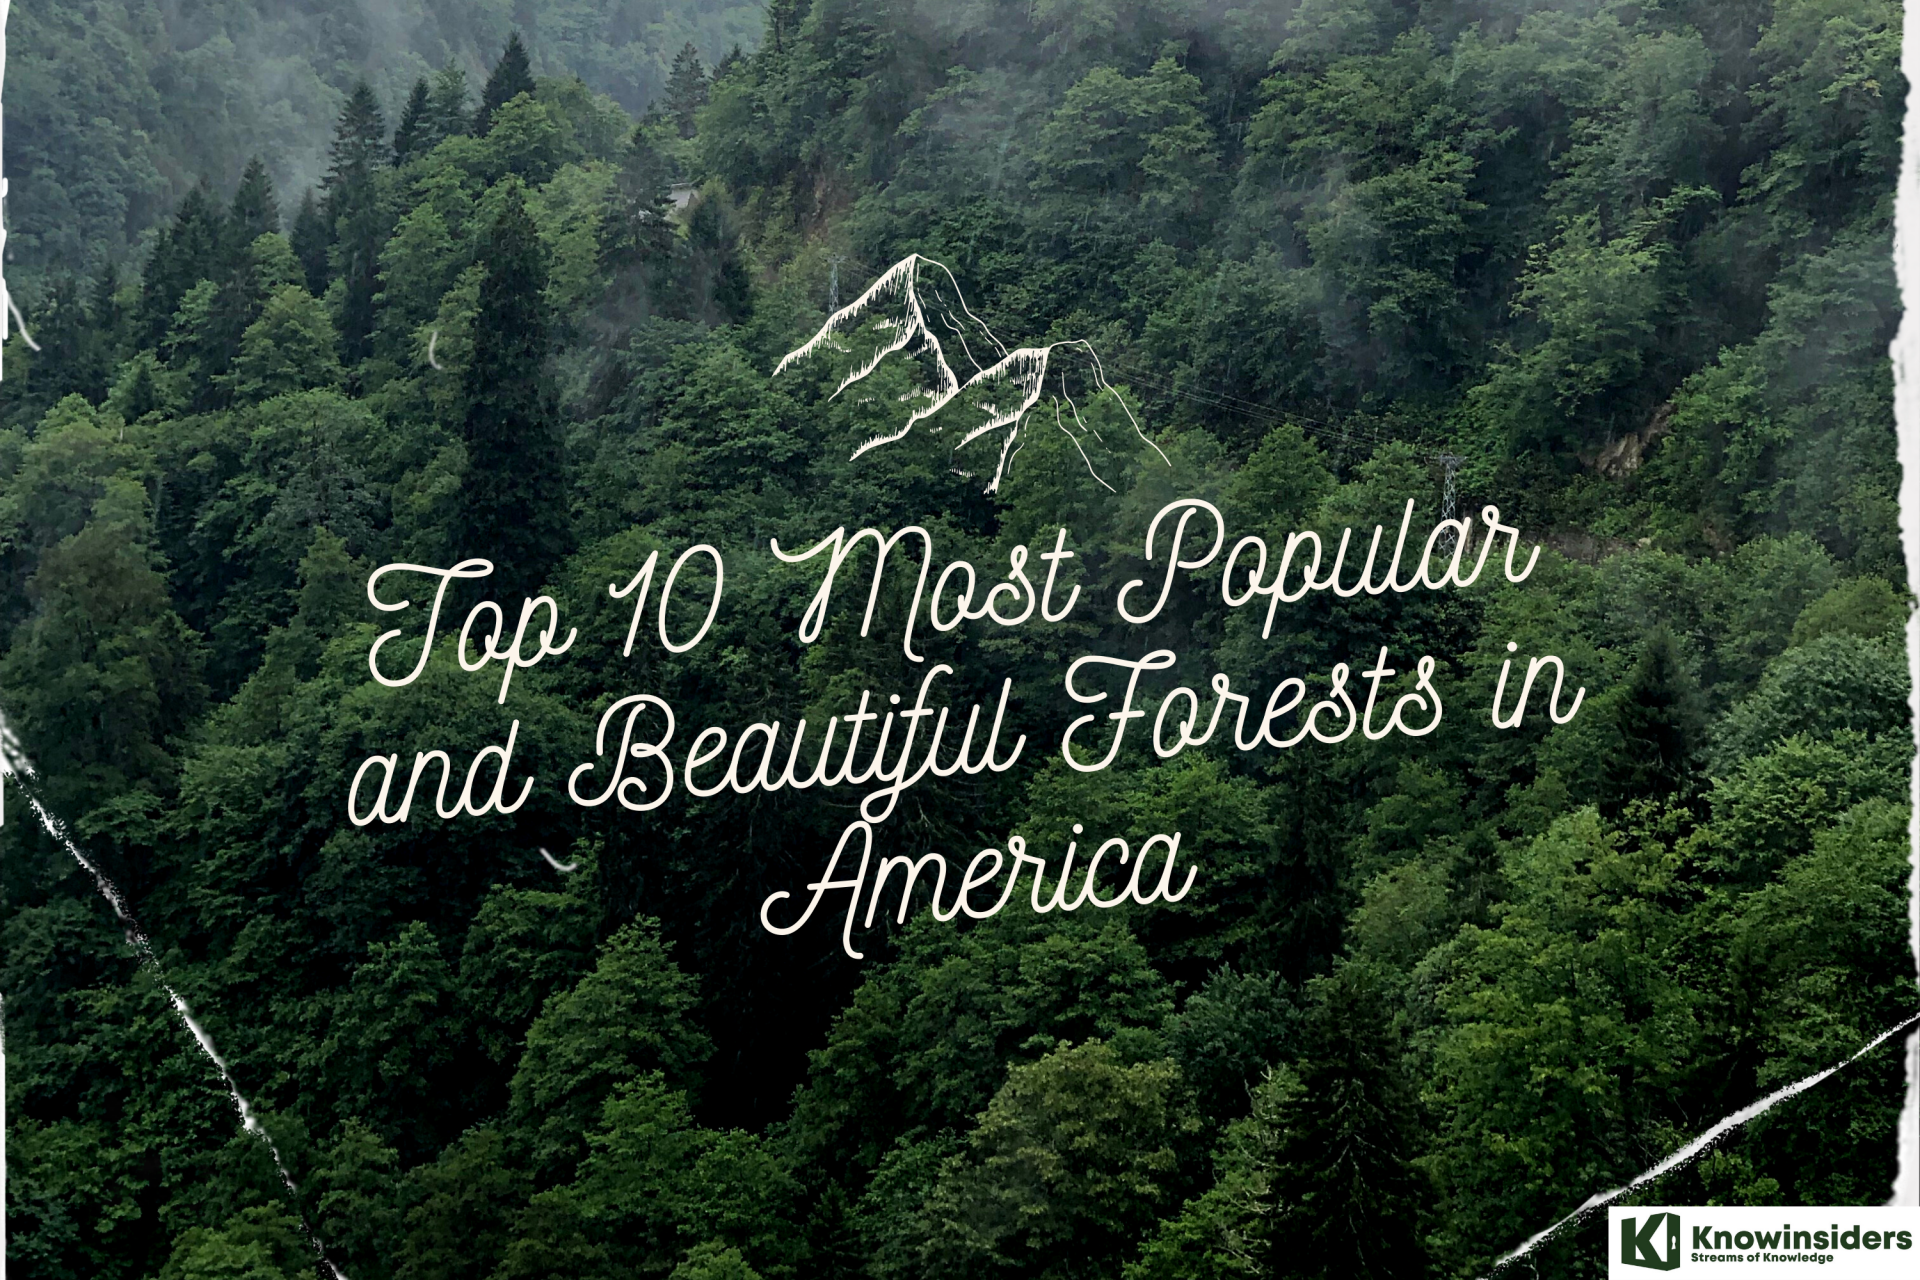 Top 10 Most Popular and Beautiful Forests in America